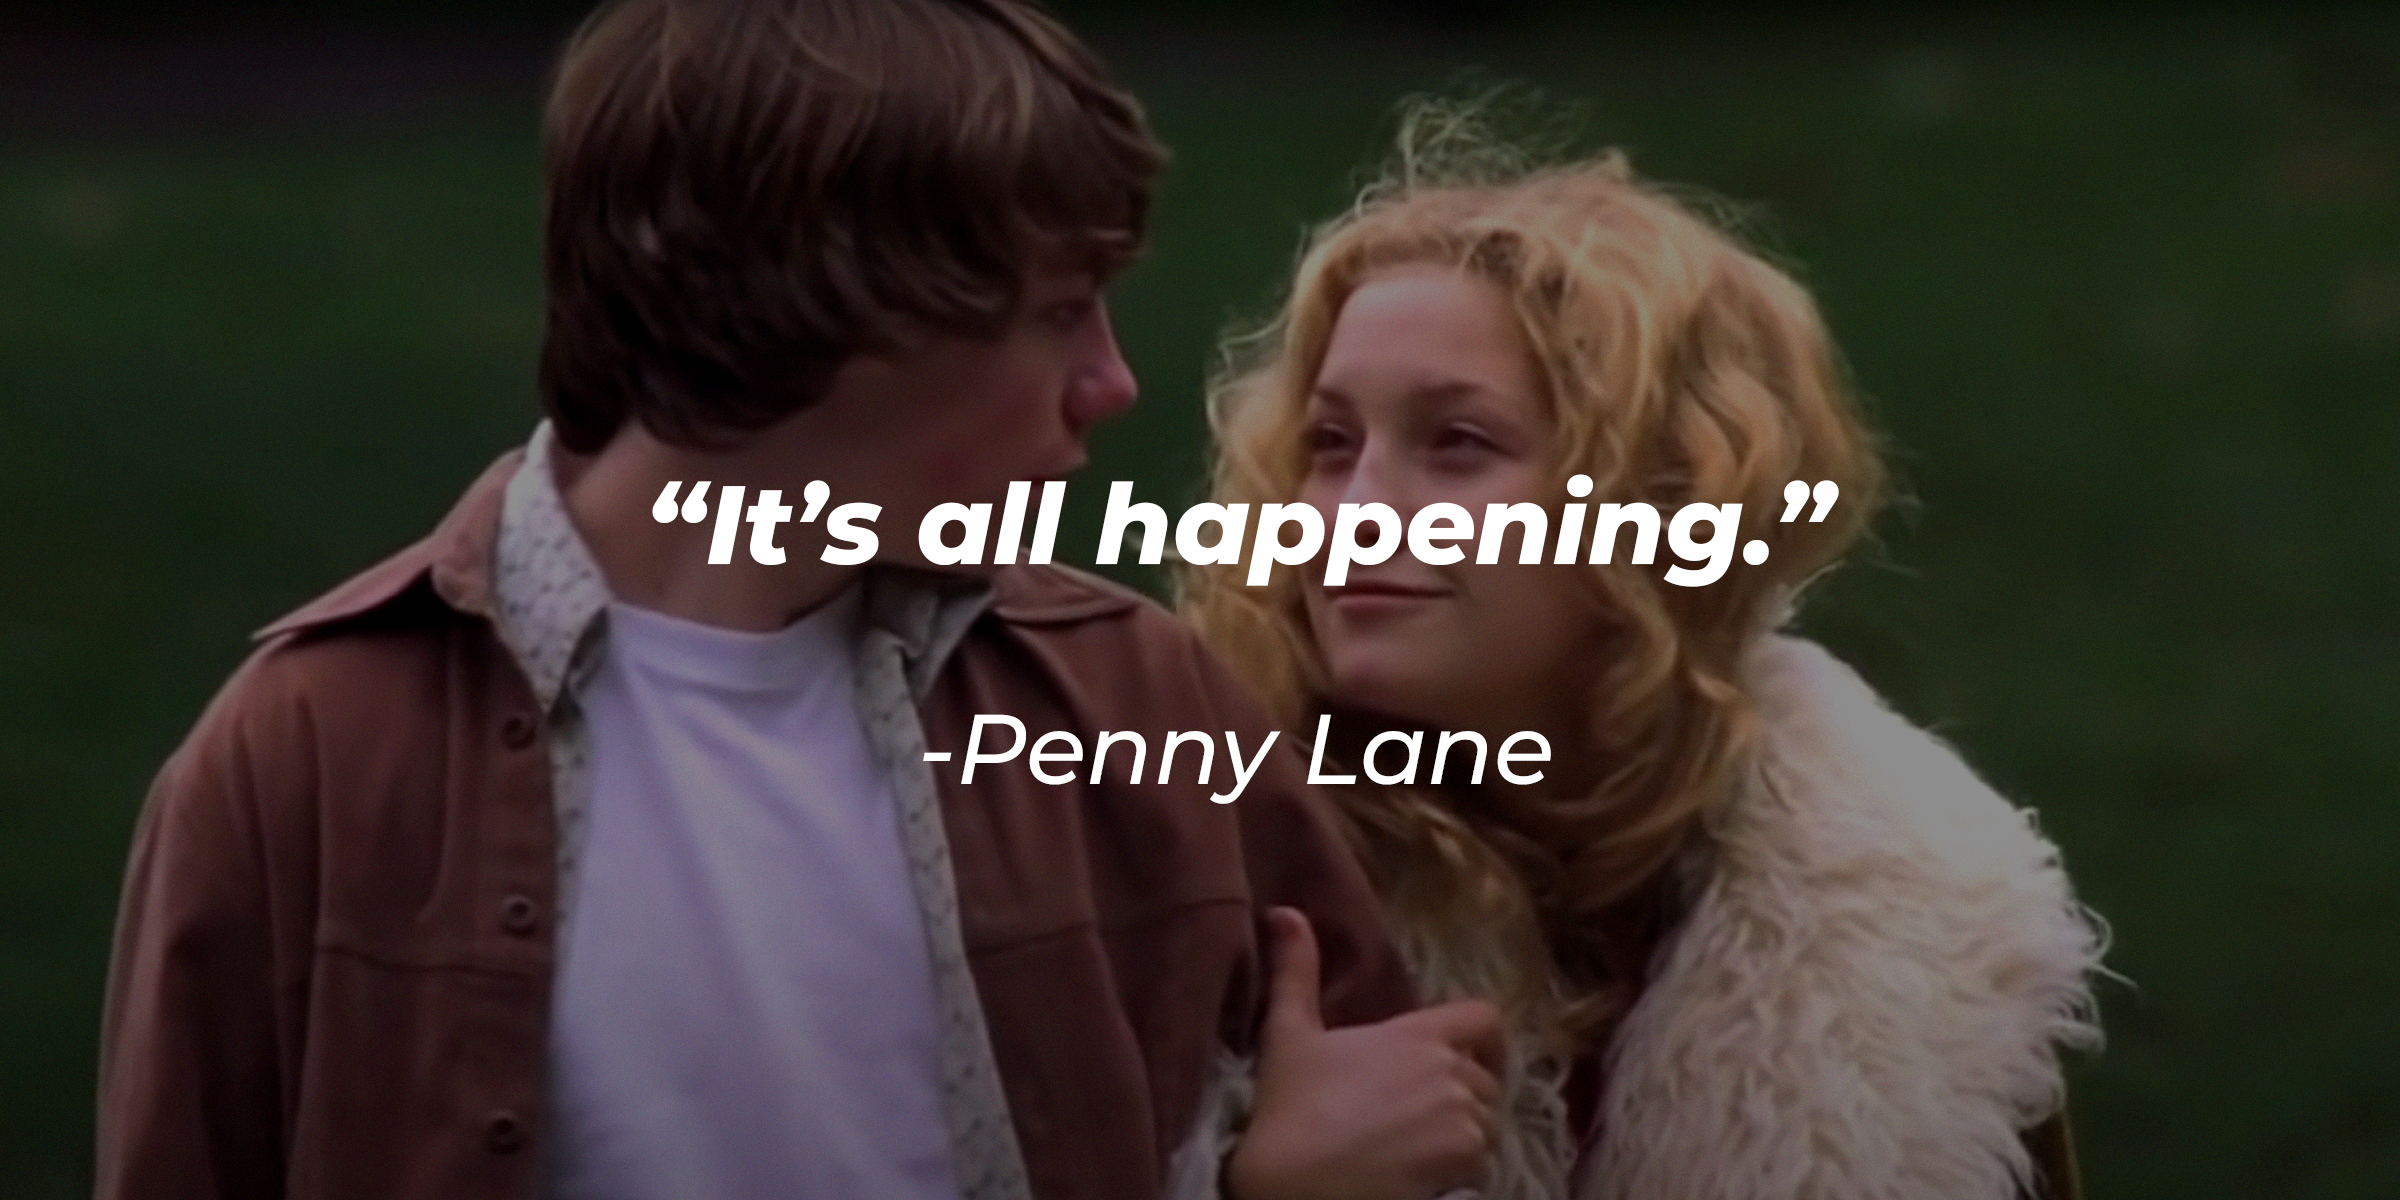 A photo of Penny Lane and William Miller with Penny Lane's quote: “It’s all happening.” | Source: facebook.com/AlmostFamousTheMovie